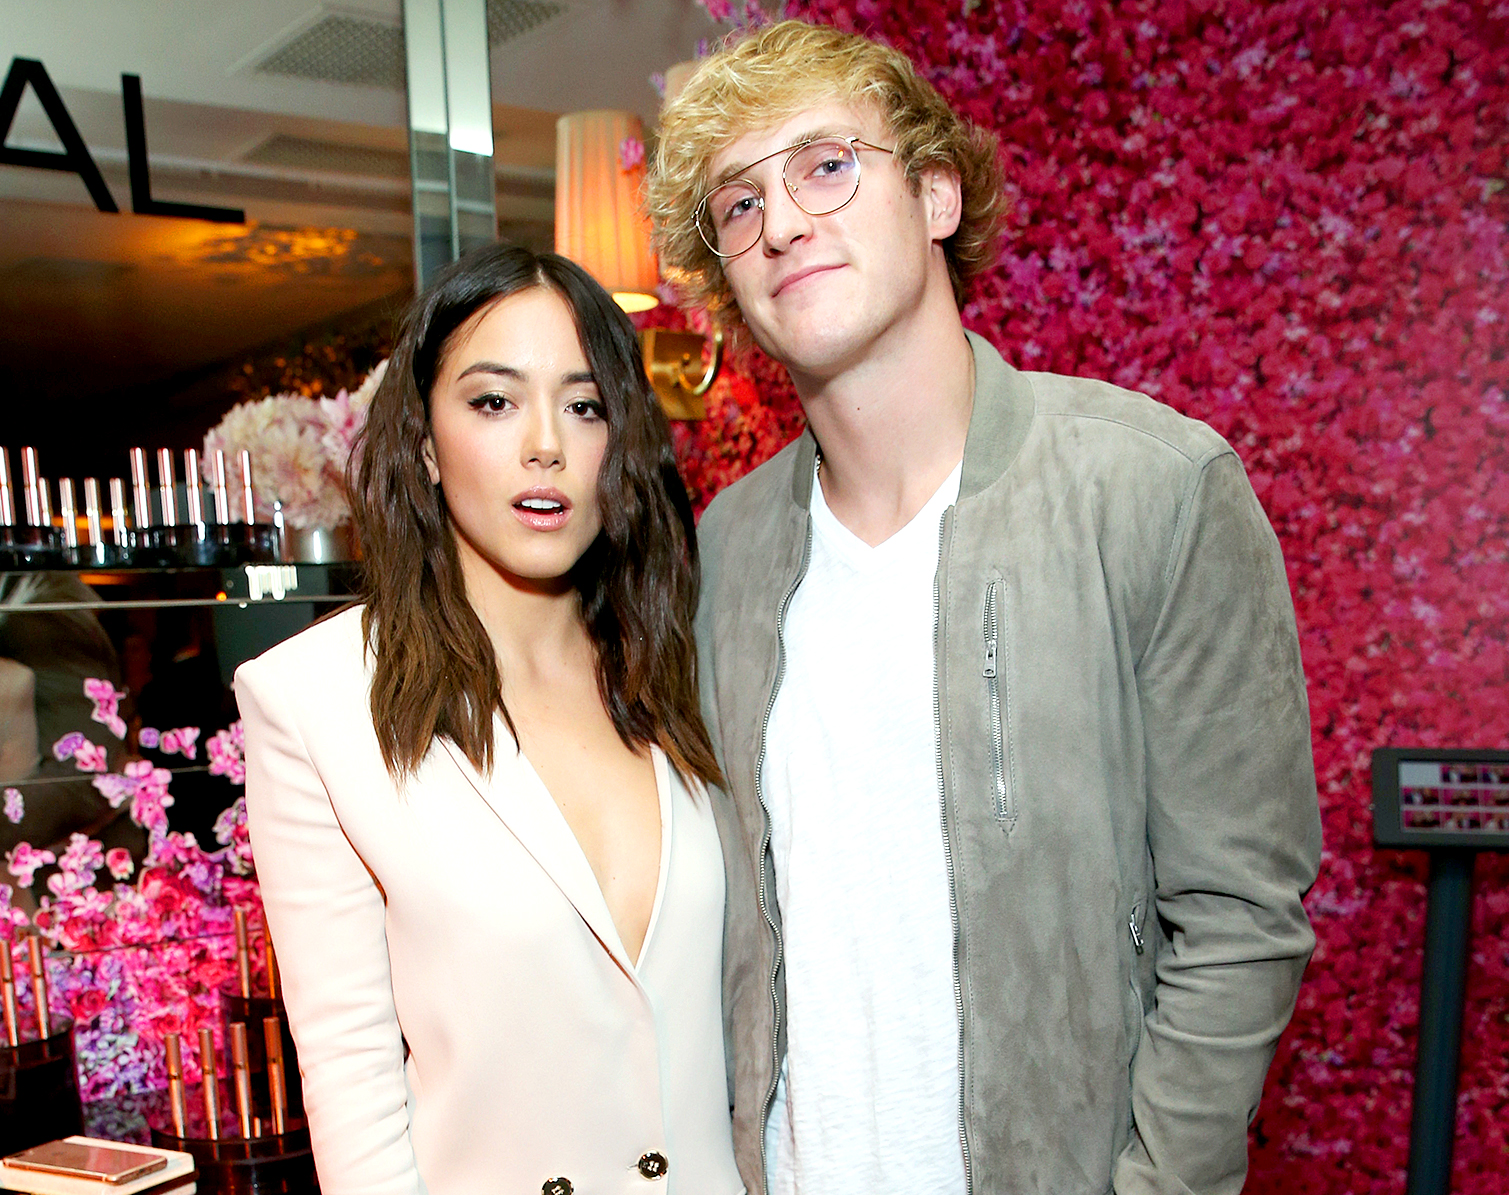 Chloe Bennet was together with Logan Paul back in 2018